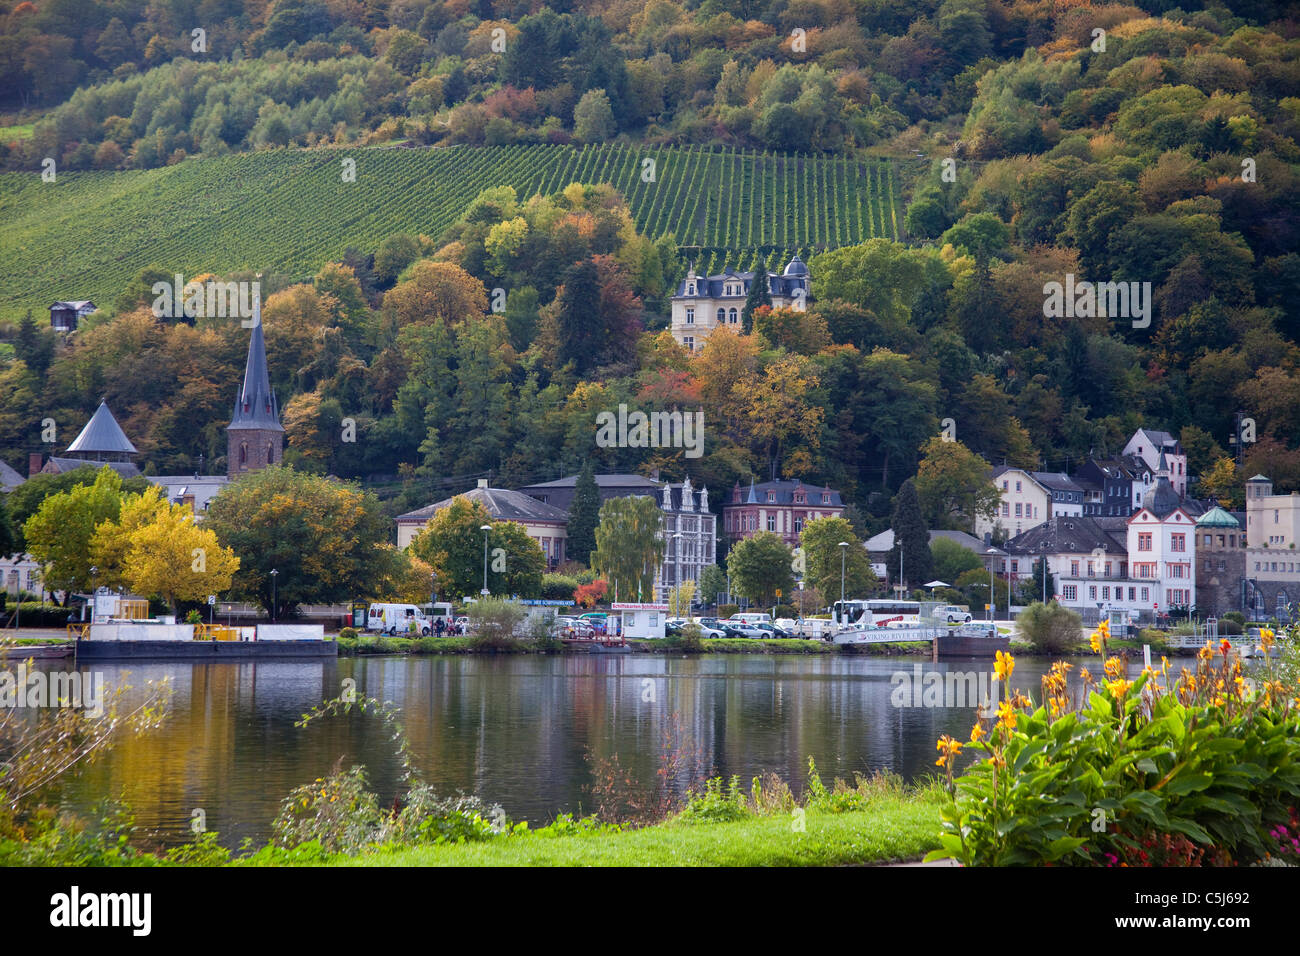 Herbstimmung am Moselufer, Traben-Trarbach, Mosel, Houses at the Riverbank, autumn, Traben-Trarbach, Moselle Stock Photo